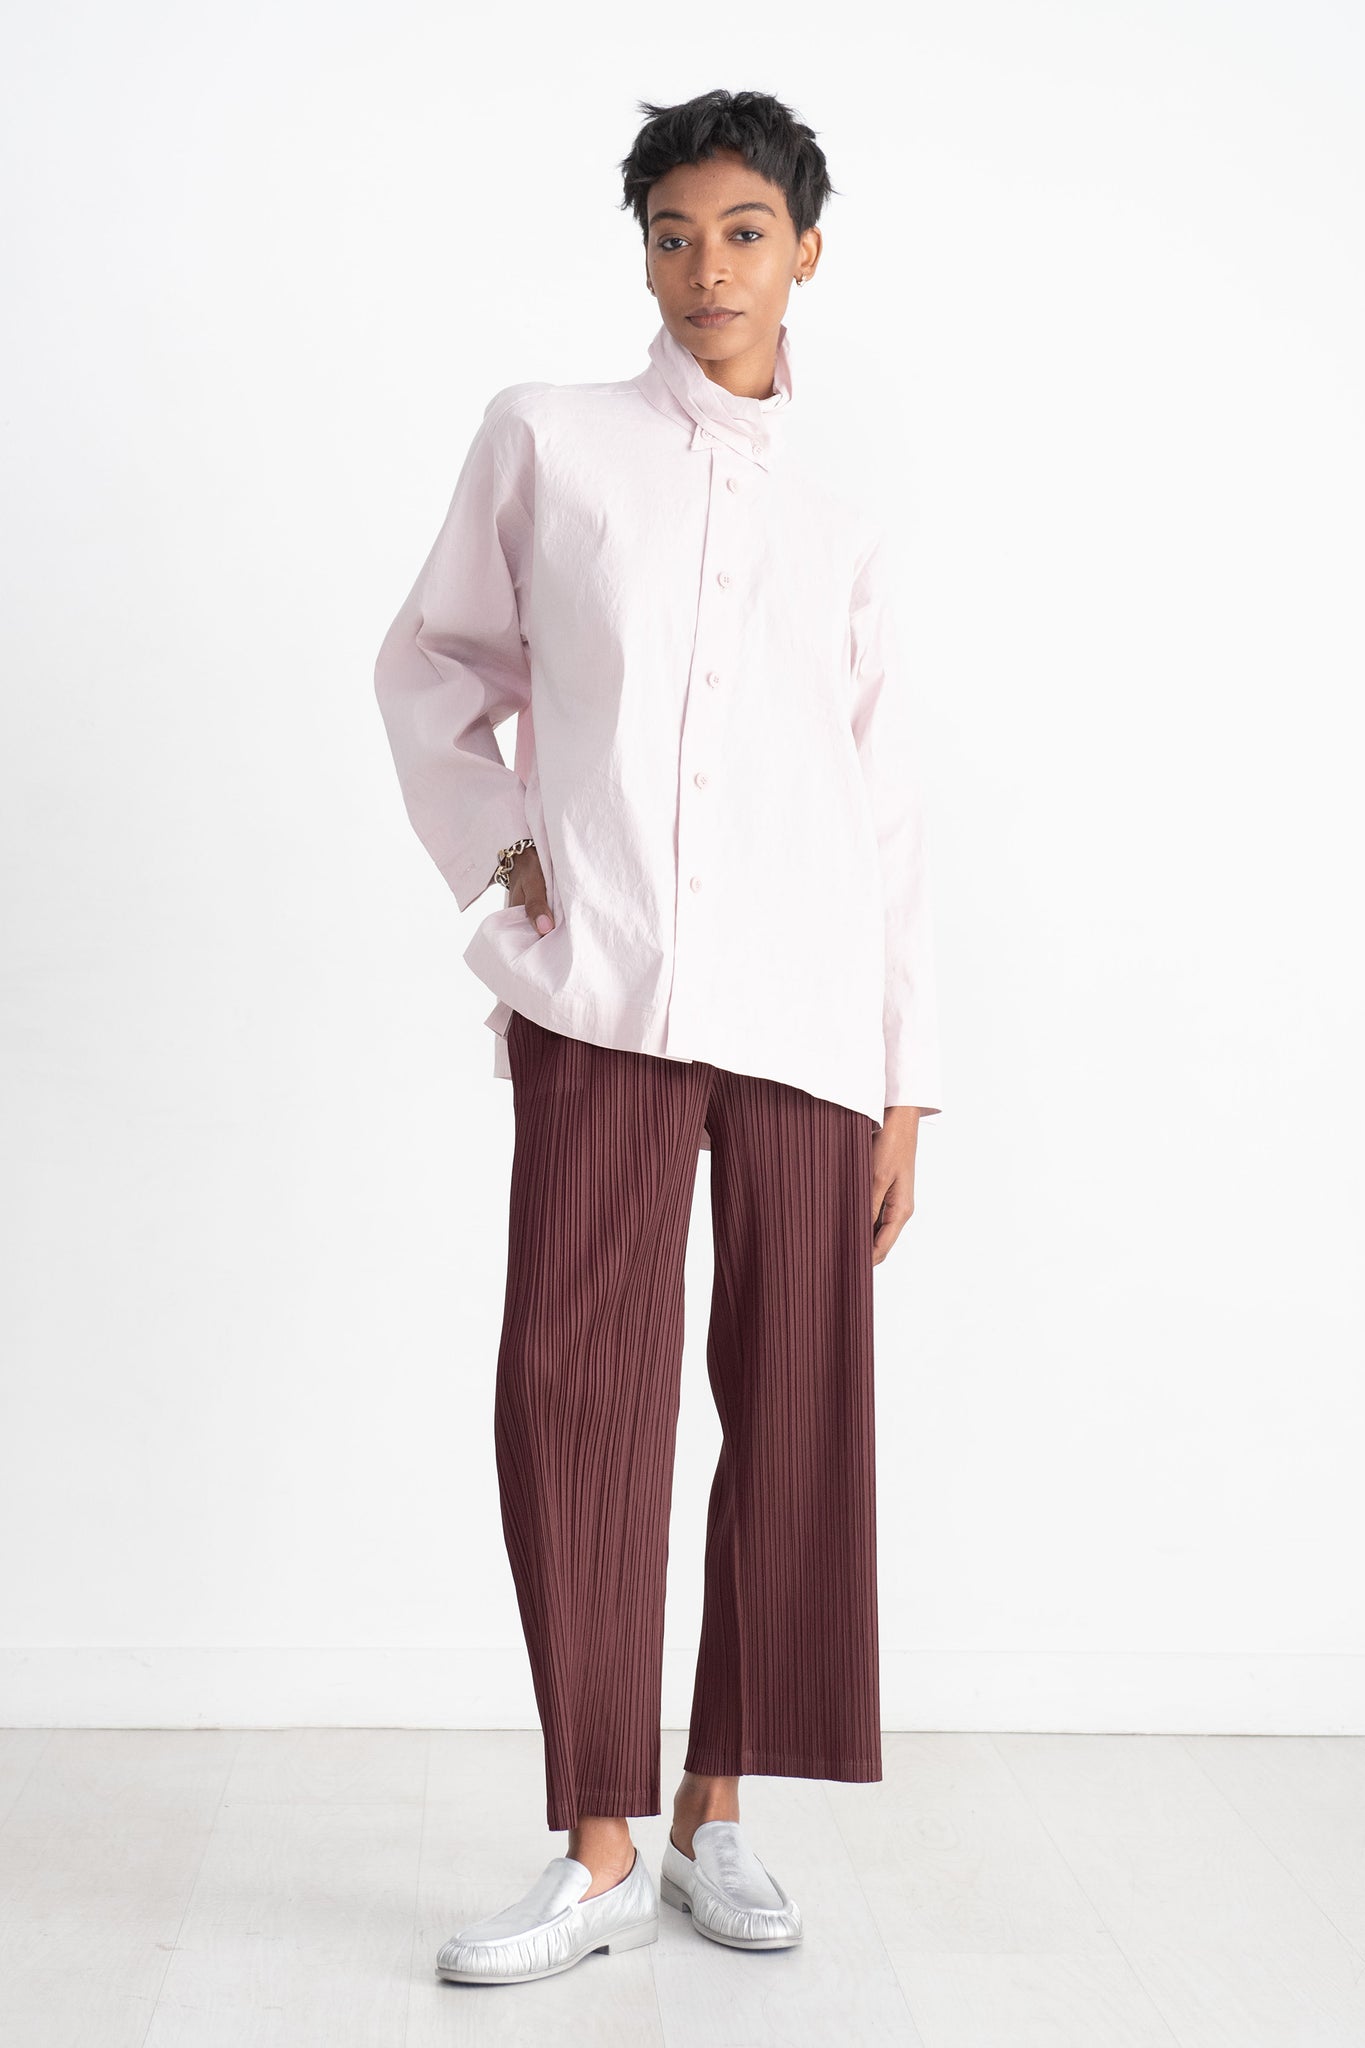 Pleats Please by Issey Miyake - Monthly Colors: February Pant, Chocolate